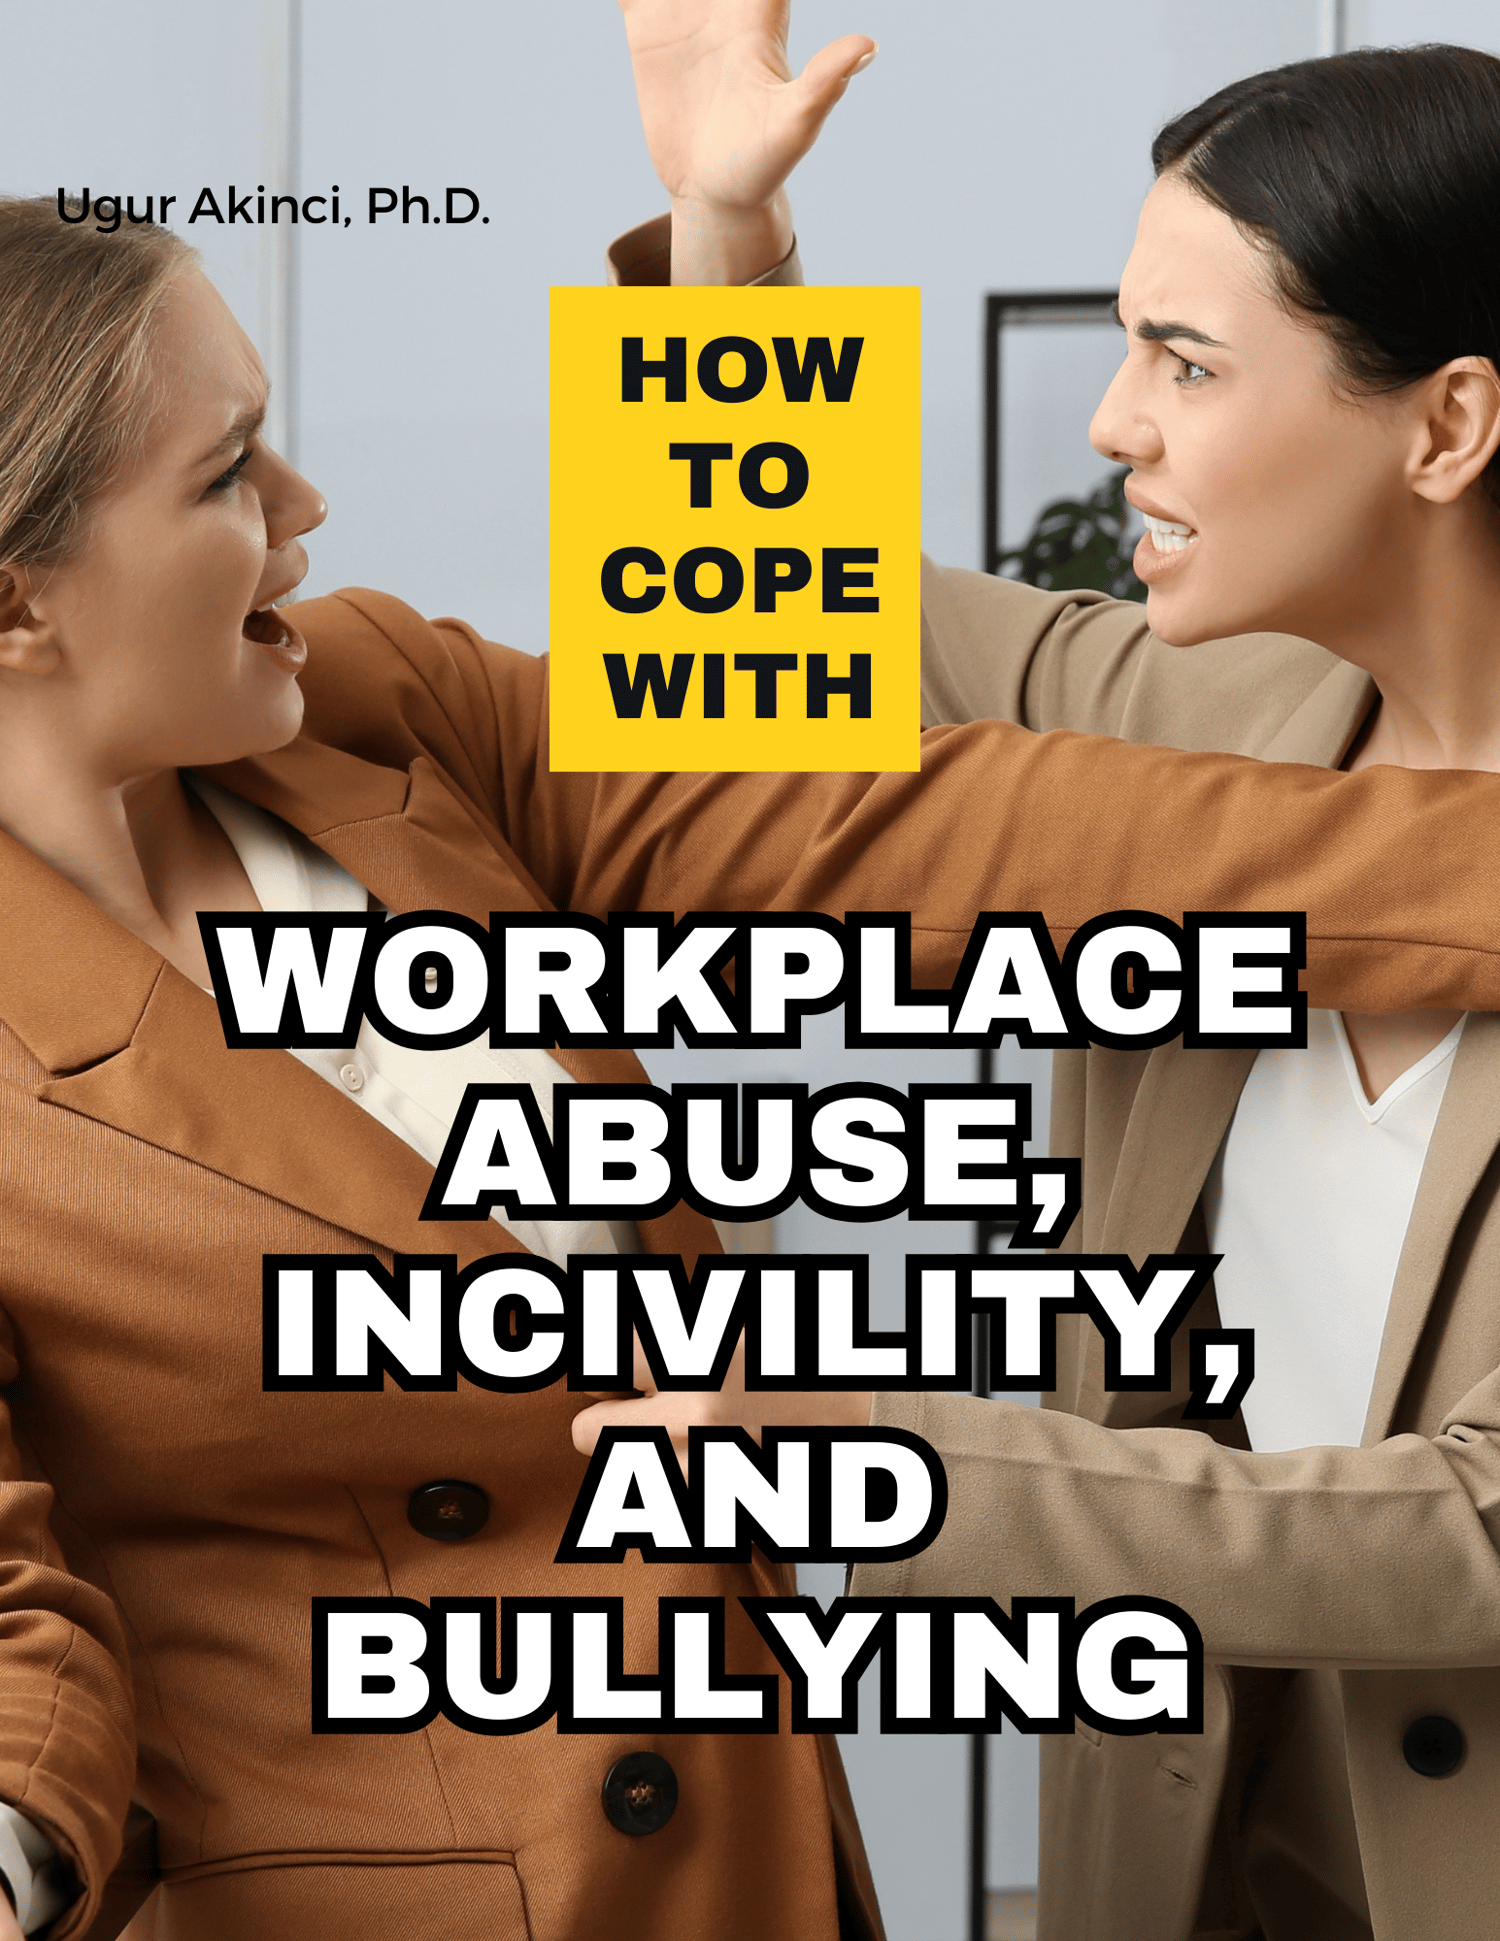 Workplace Abuse, Incivility, Bullying